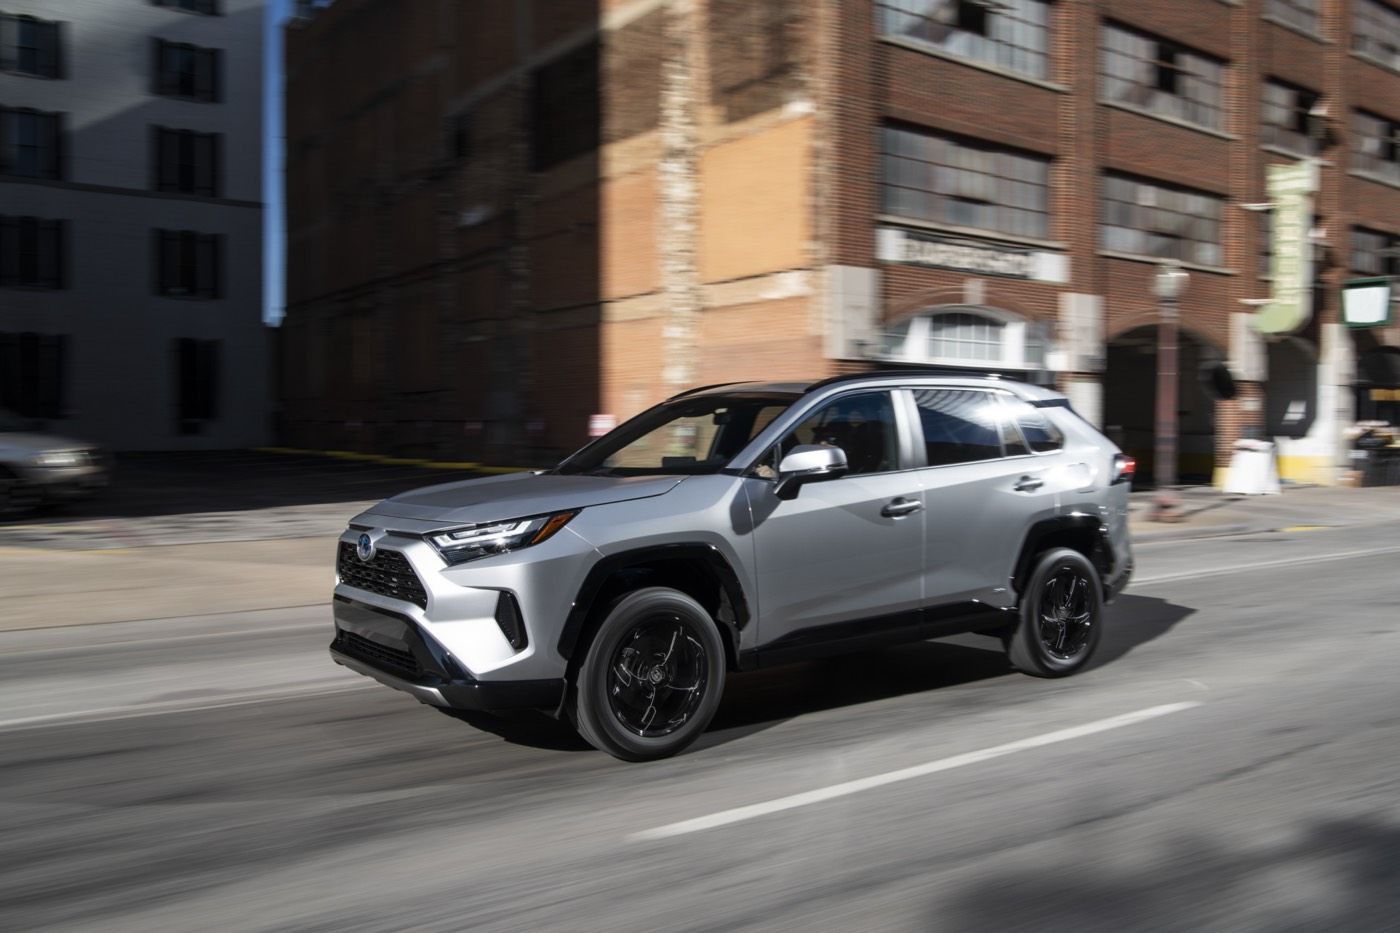 Front 3/4 side view of a silver 2022 Toyota RAV4 SE Hybrid SUV driving on a city boulevard